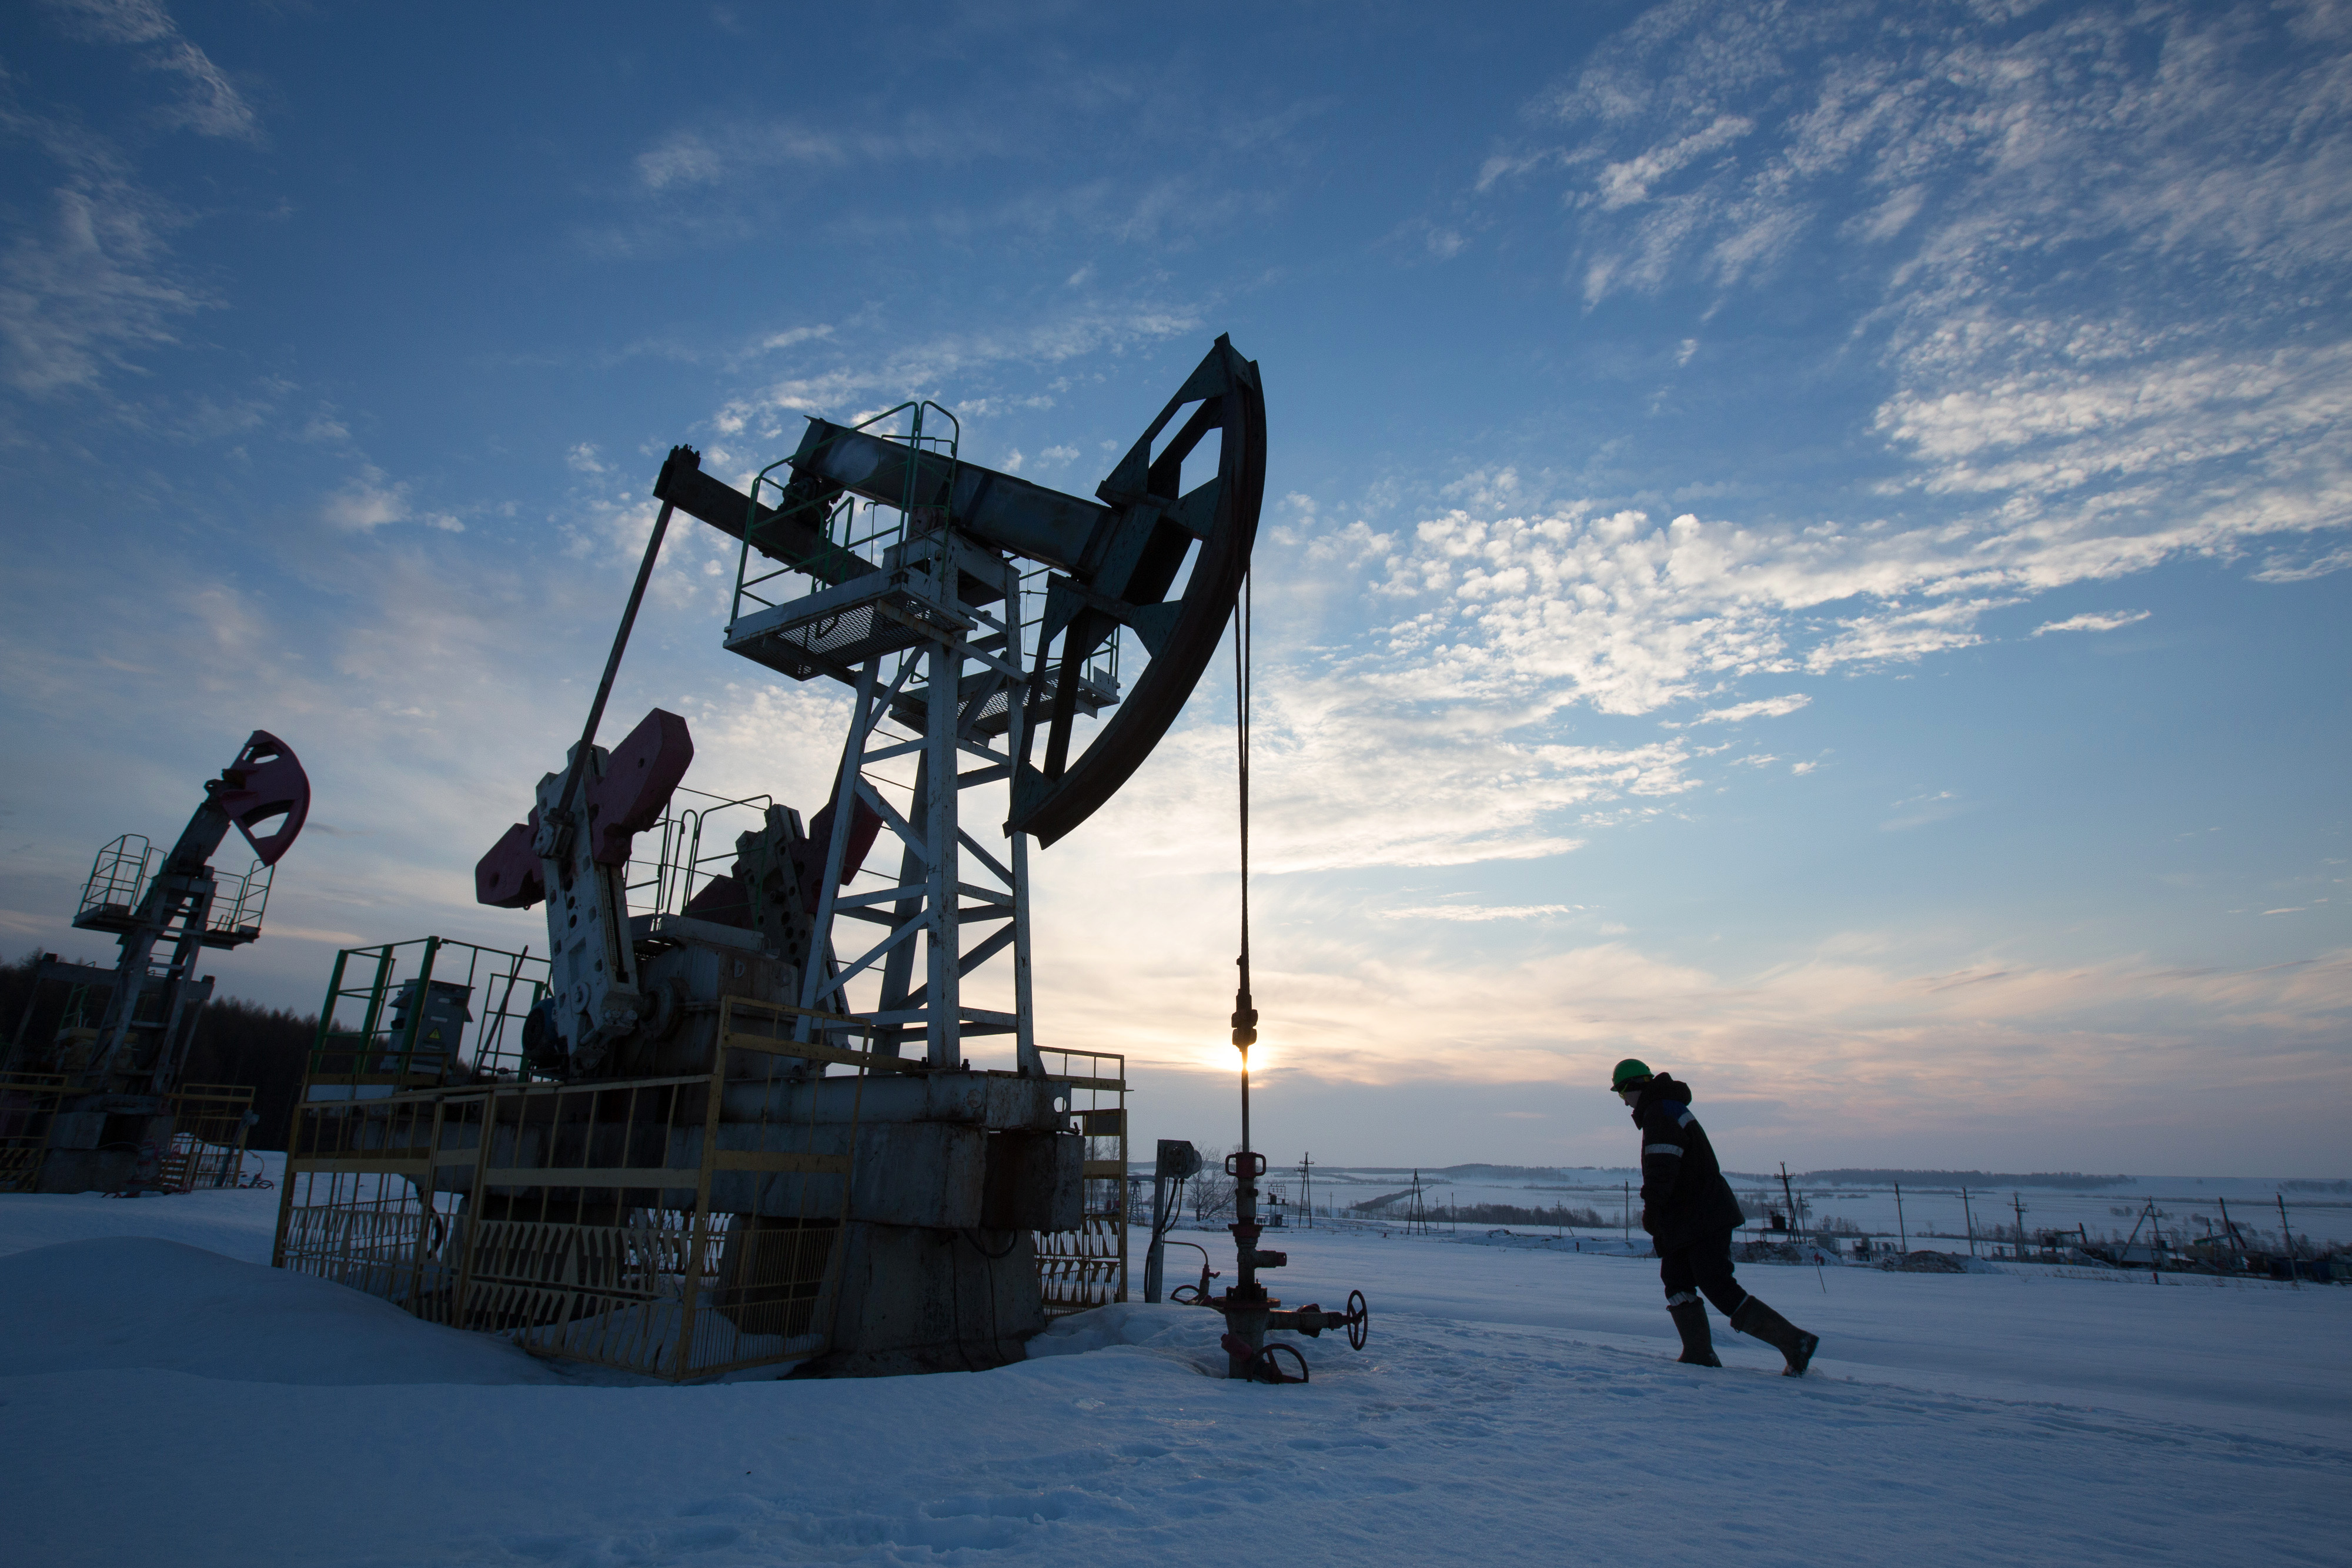 An oil worker inspects a pumping jack, also known as a 'nodding donkey,' during drilling operations in an oilfield operated by Bashneft PAO in the village of Otrada, 150kms from Ufa, Russia, on Saturday, March 5, 2016. (Andrey Rudakov—Bloomberg/Getty Images)